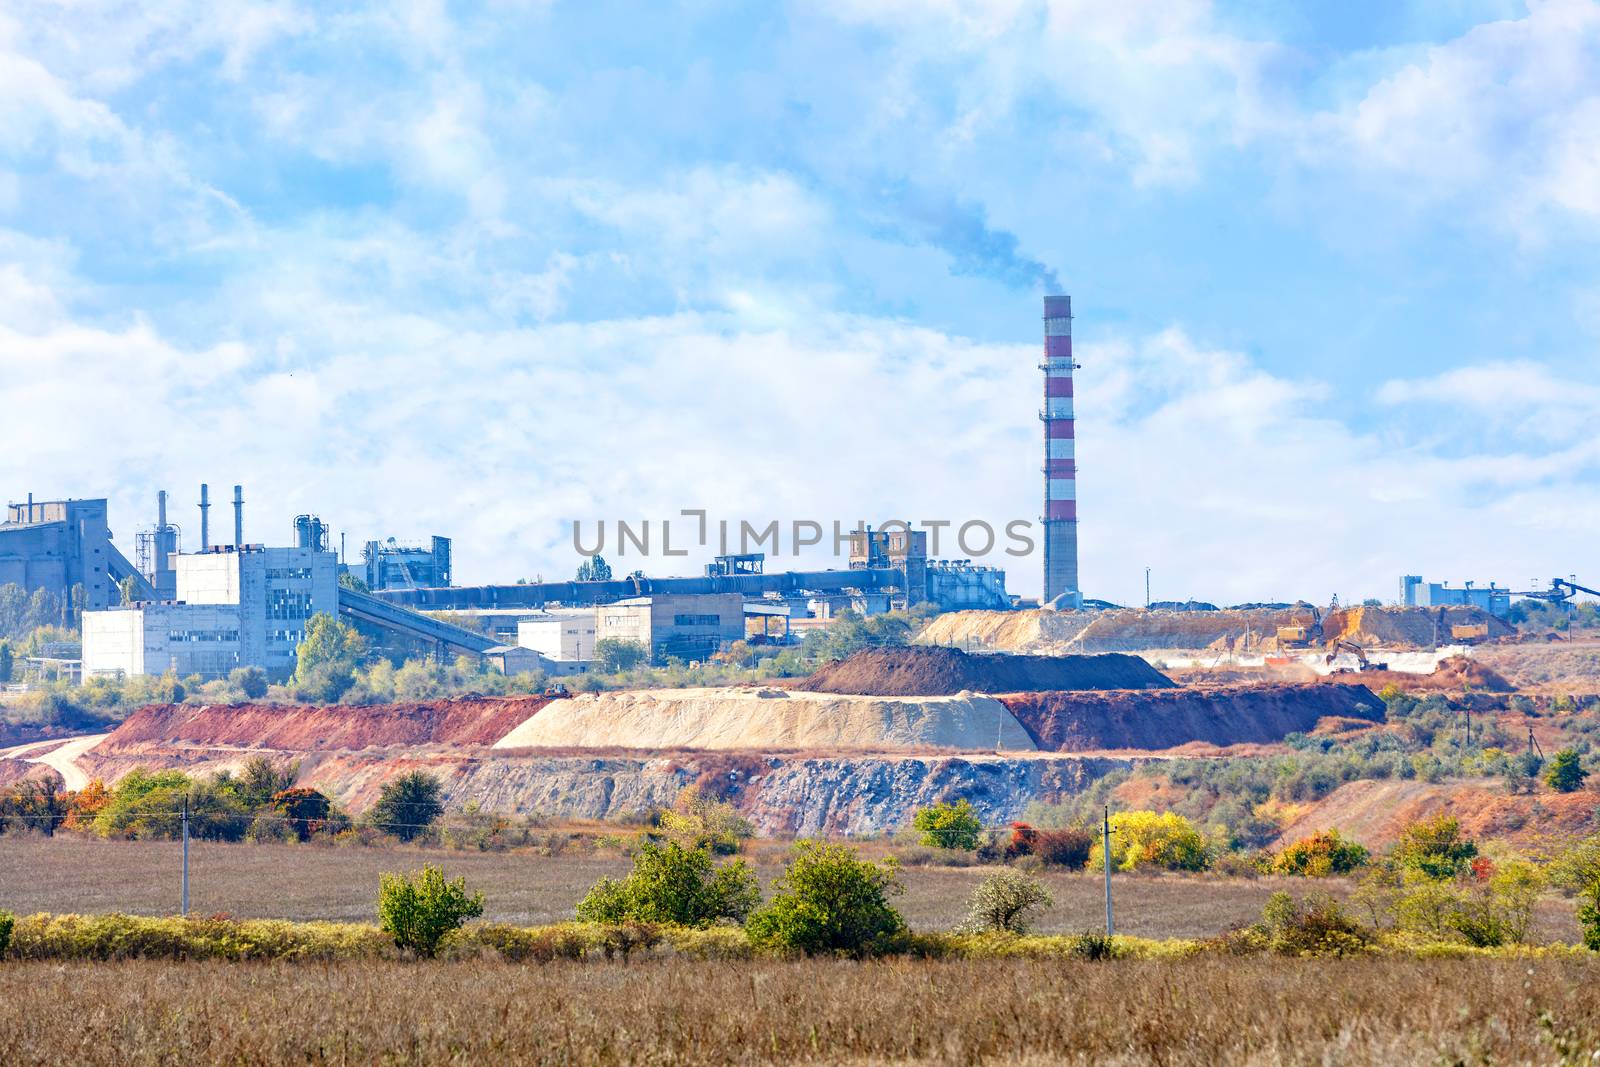 Sand and clay quarry, cement production complex on the horizon with a tall chimney against a blue cloudy sky, copy space.